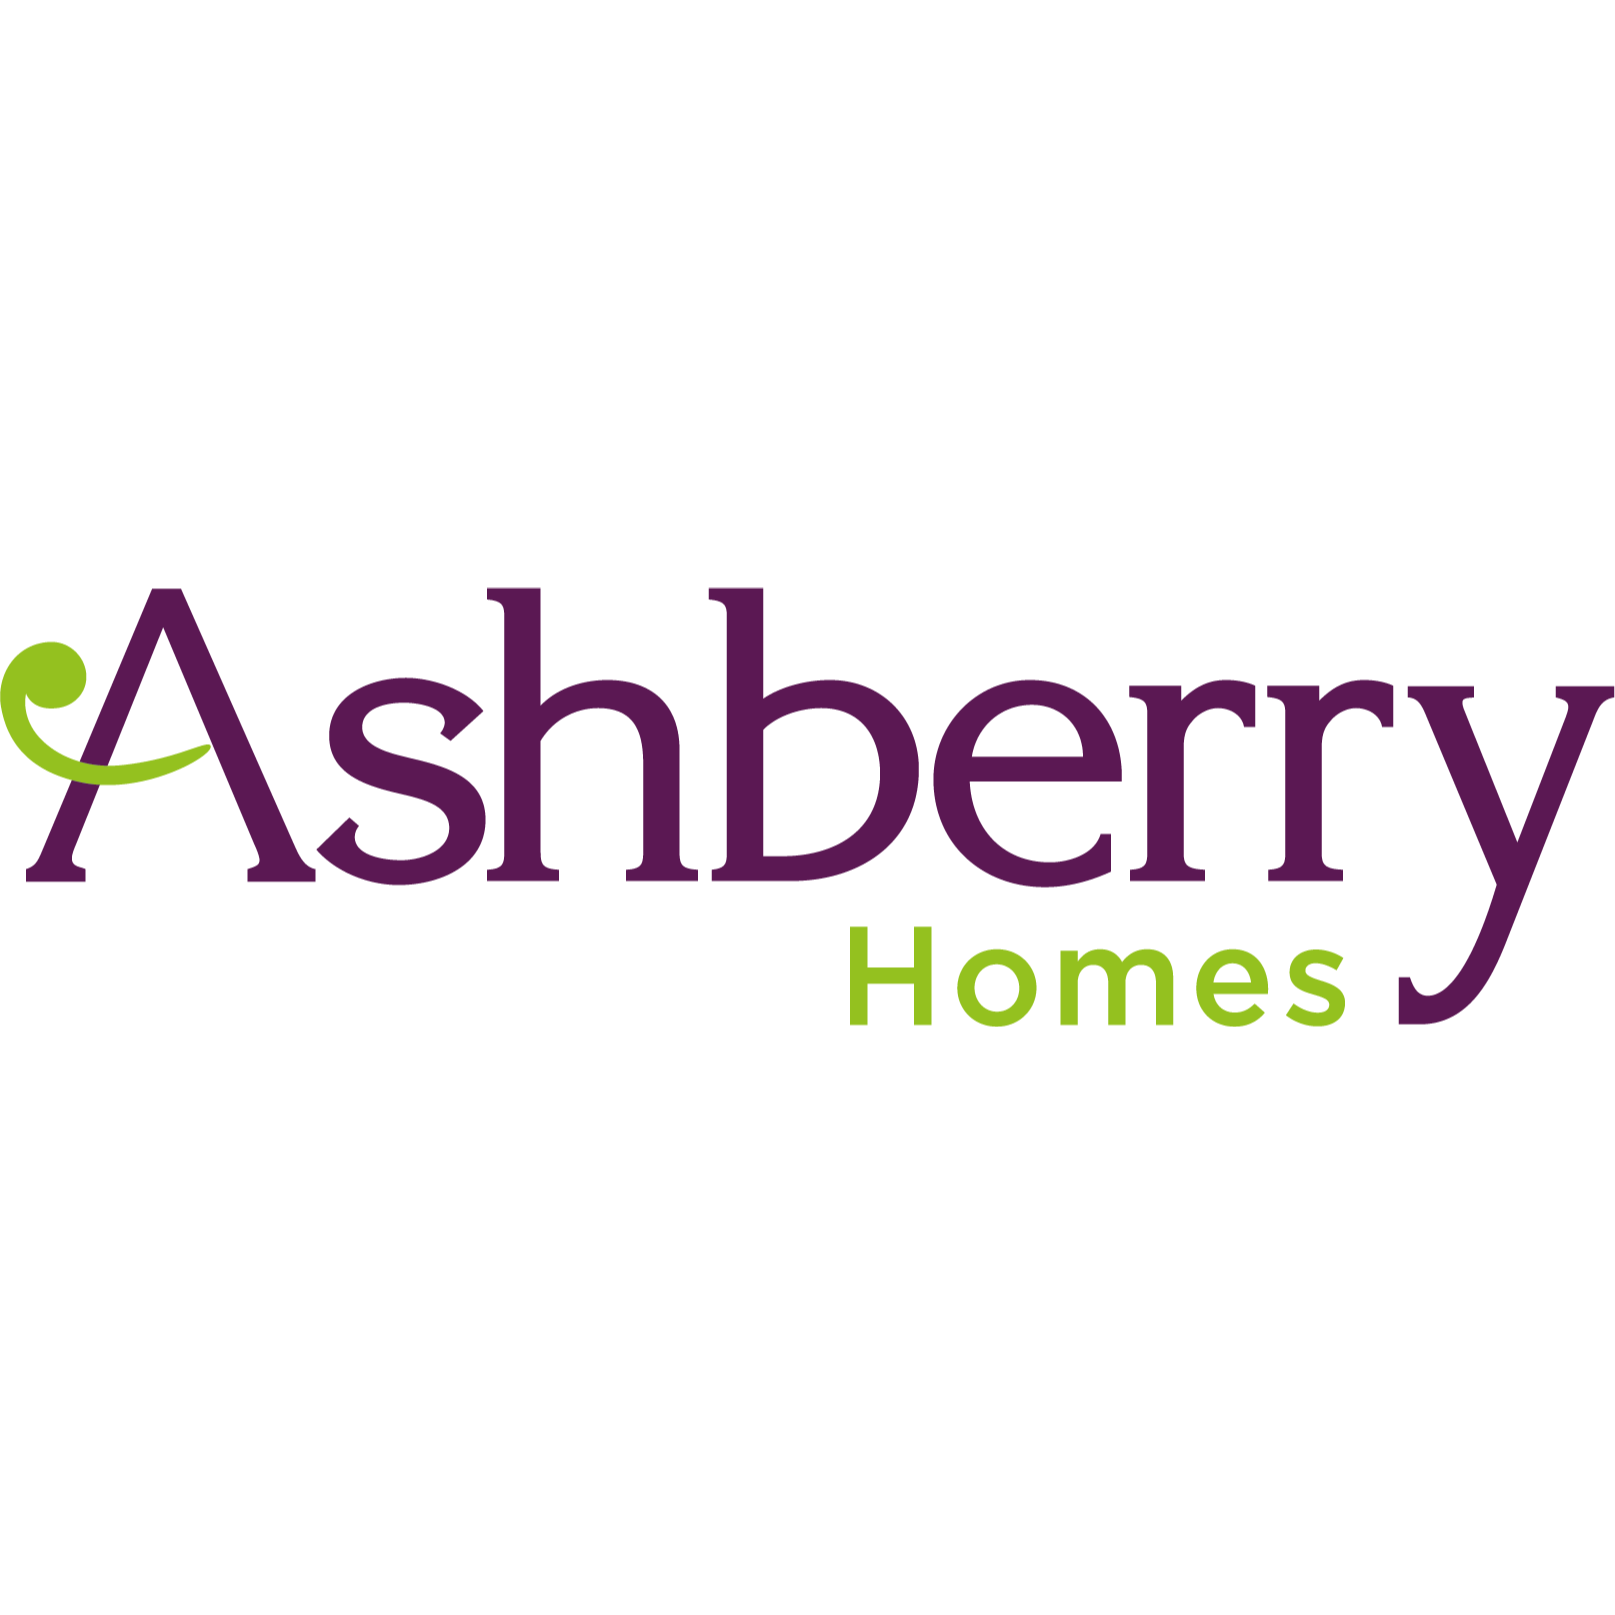 Ashberry Homes - Victoria Place - Stafford, Staffordshire ST17 4FD - 01785 508635 | ShowMeLocal.com